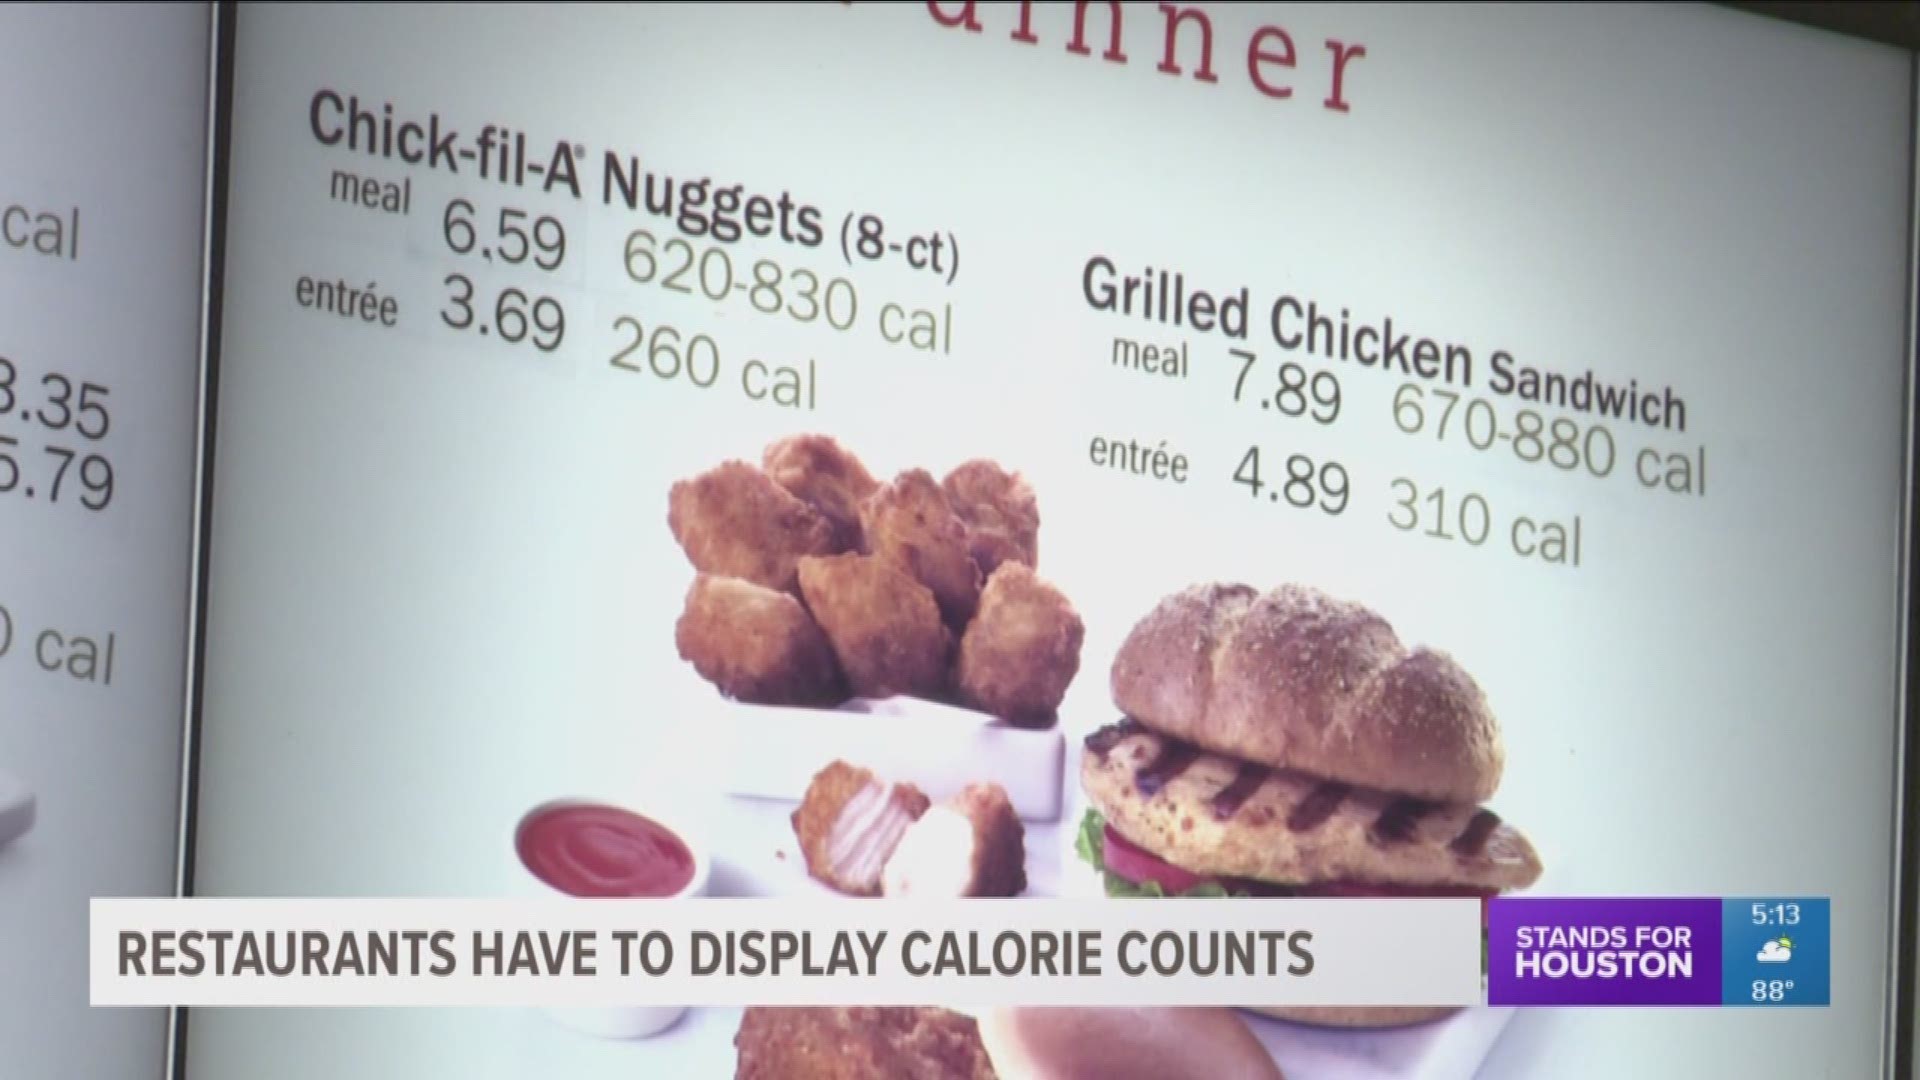 An Obama-era regulation went into effect this week that requires all chain restaurants to prominently display calorie counts on their menus.